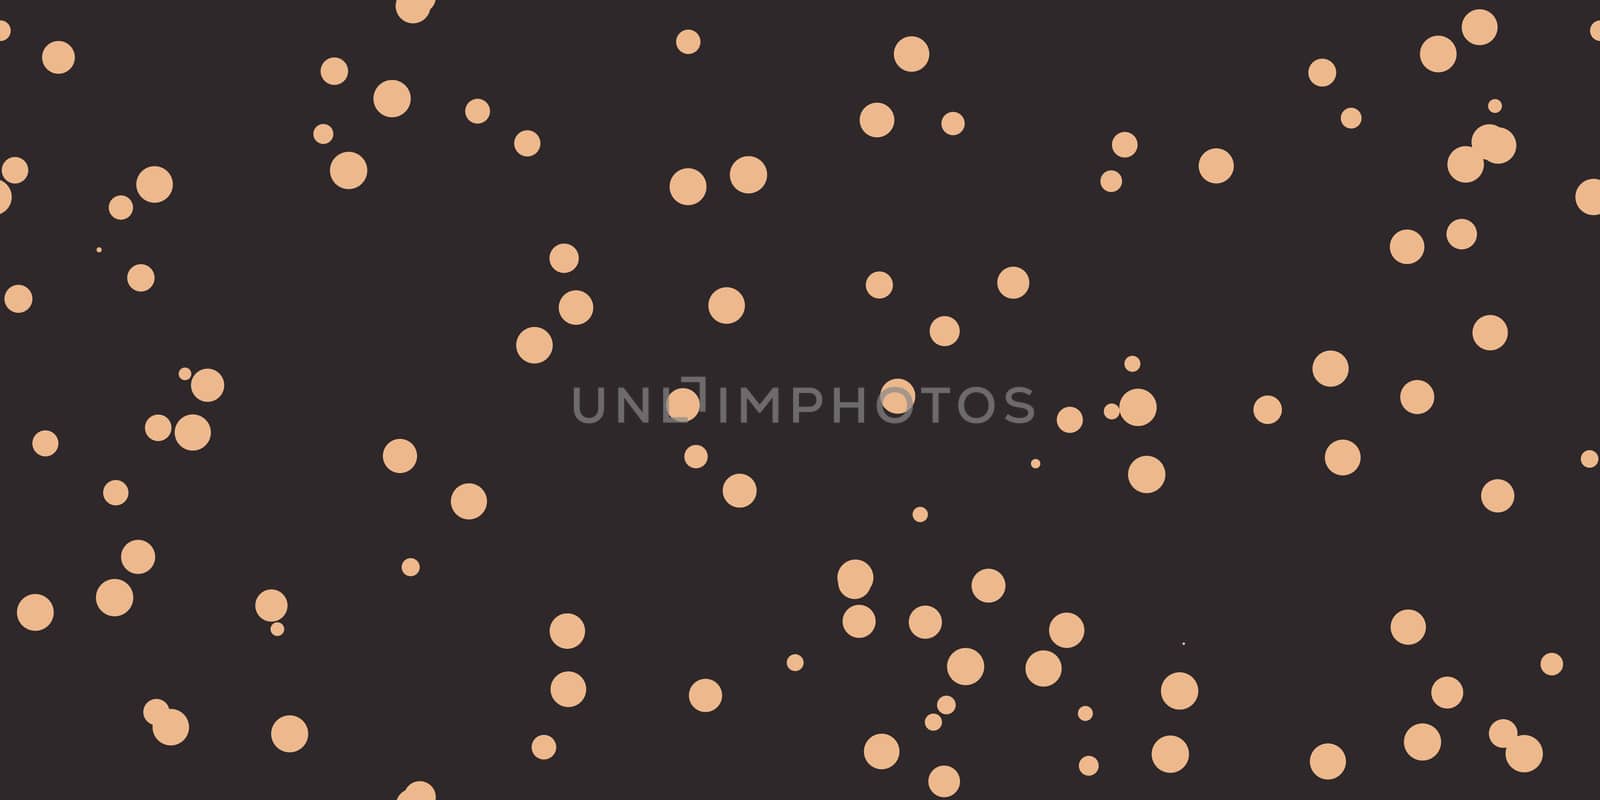 Beige Brown Shambolic Bubbles Backgrounds. Seamless Artistic Random Dots Texture. Chaotic Bright Dots Backdrop.